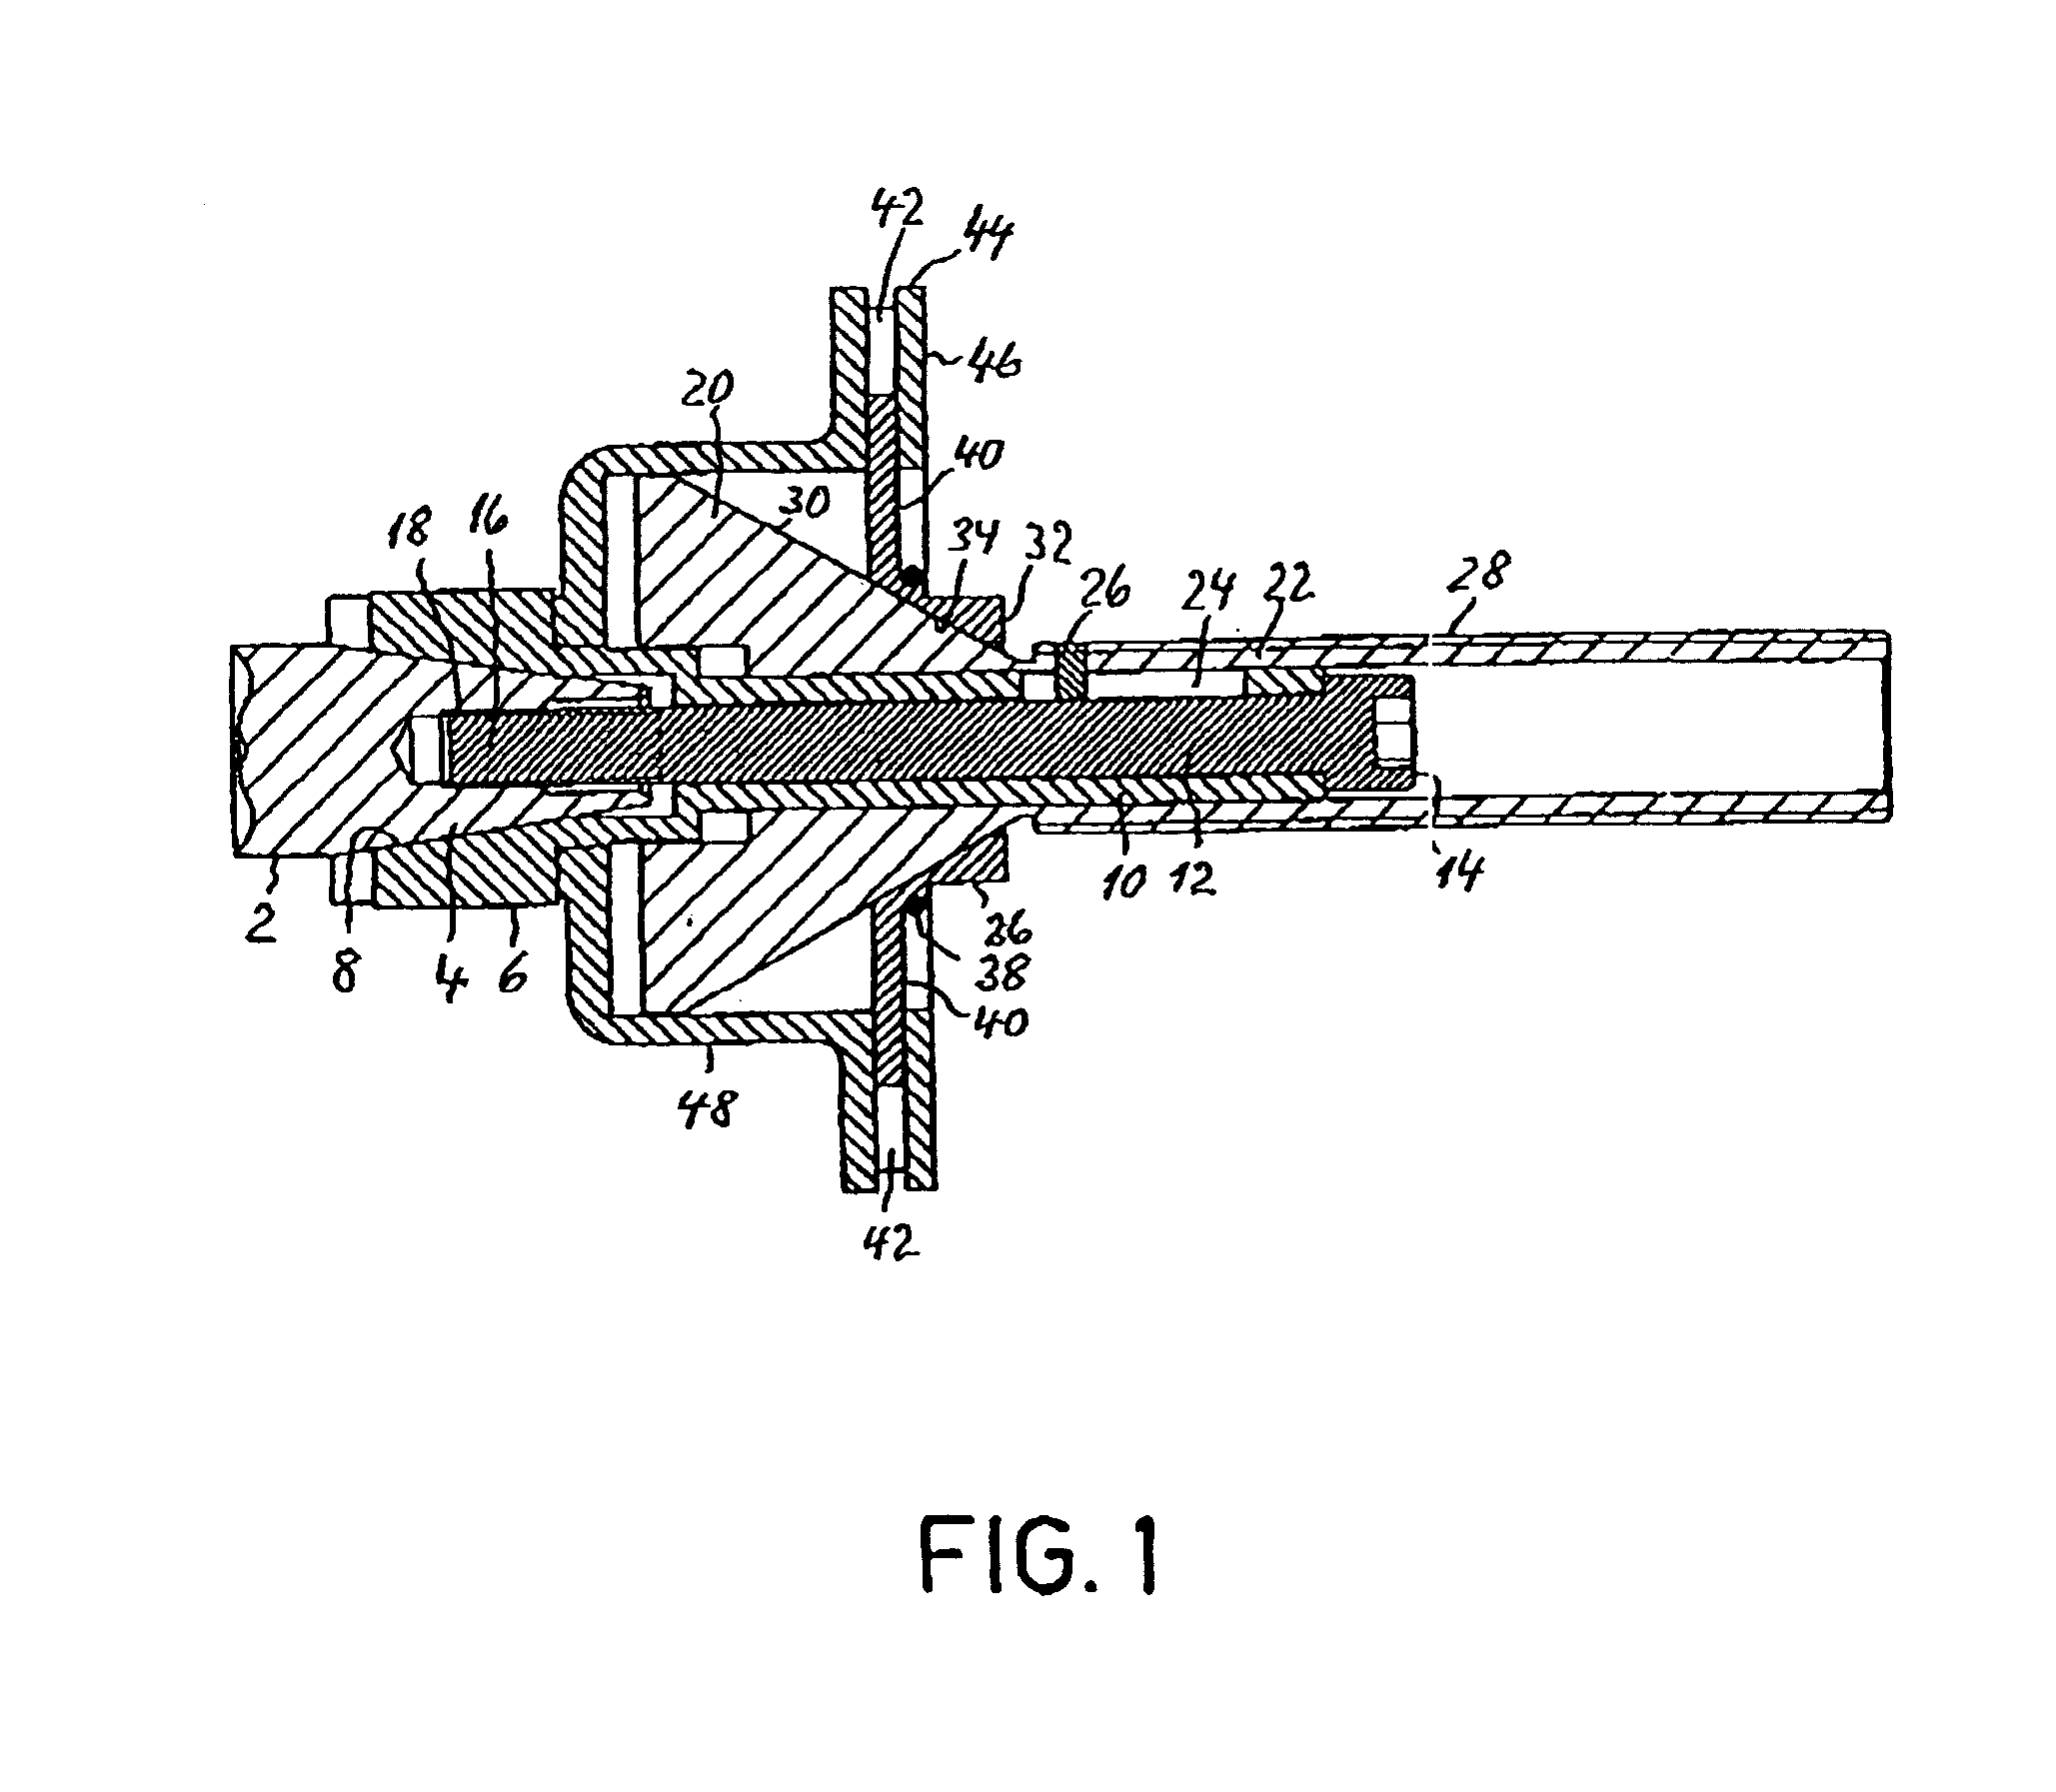 Quick-clamping device with hub centering ring for securing a vehicle wheel on the shaft of wheel-balancing machines